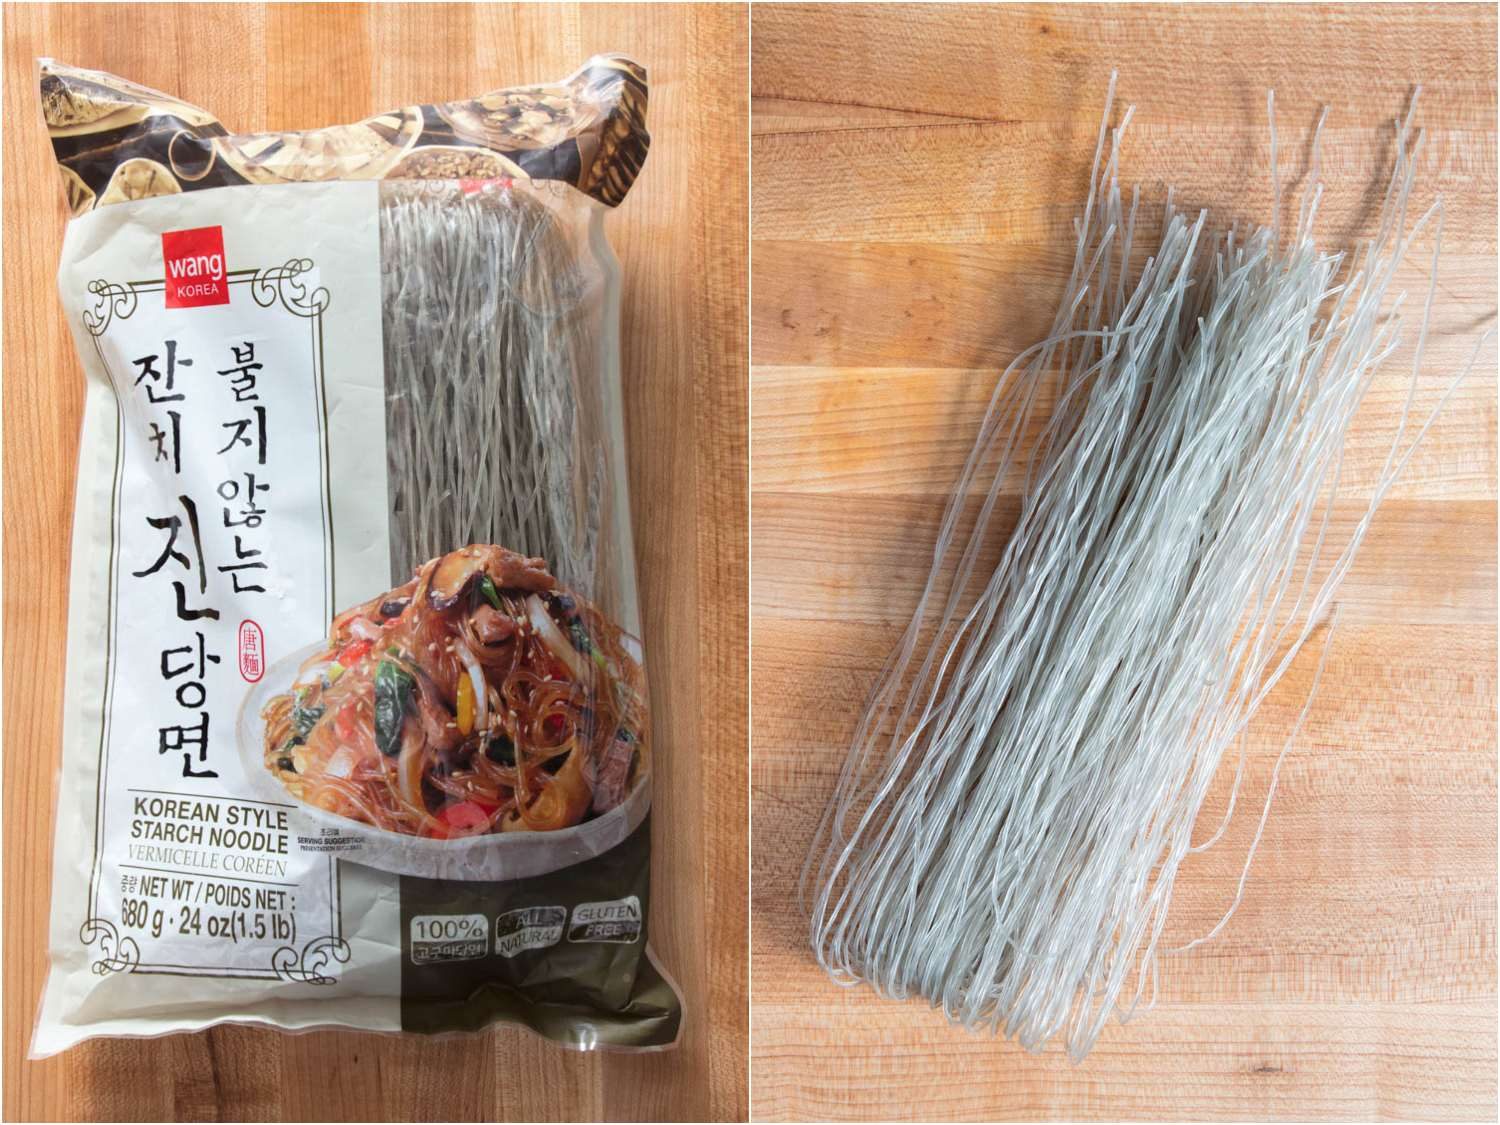 Sweet potato noodles for japchae (in and out of the packaging)